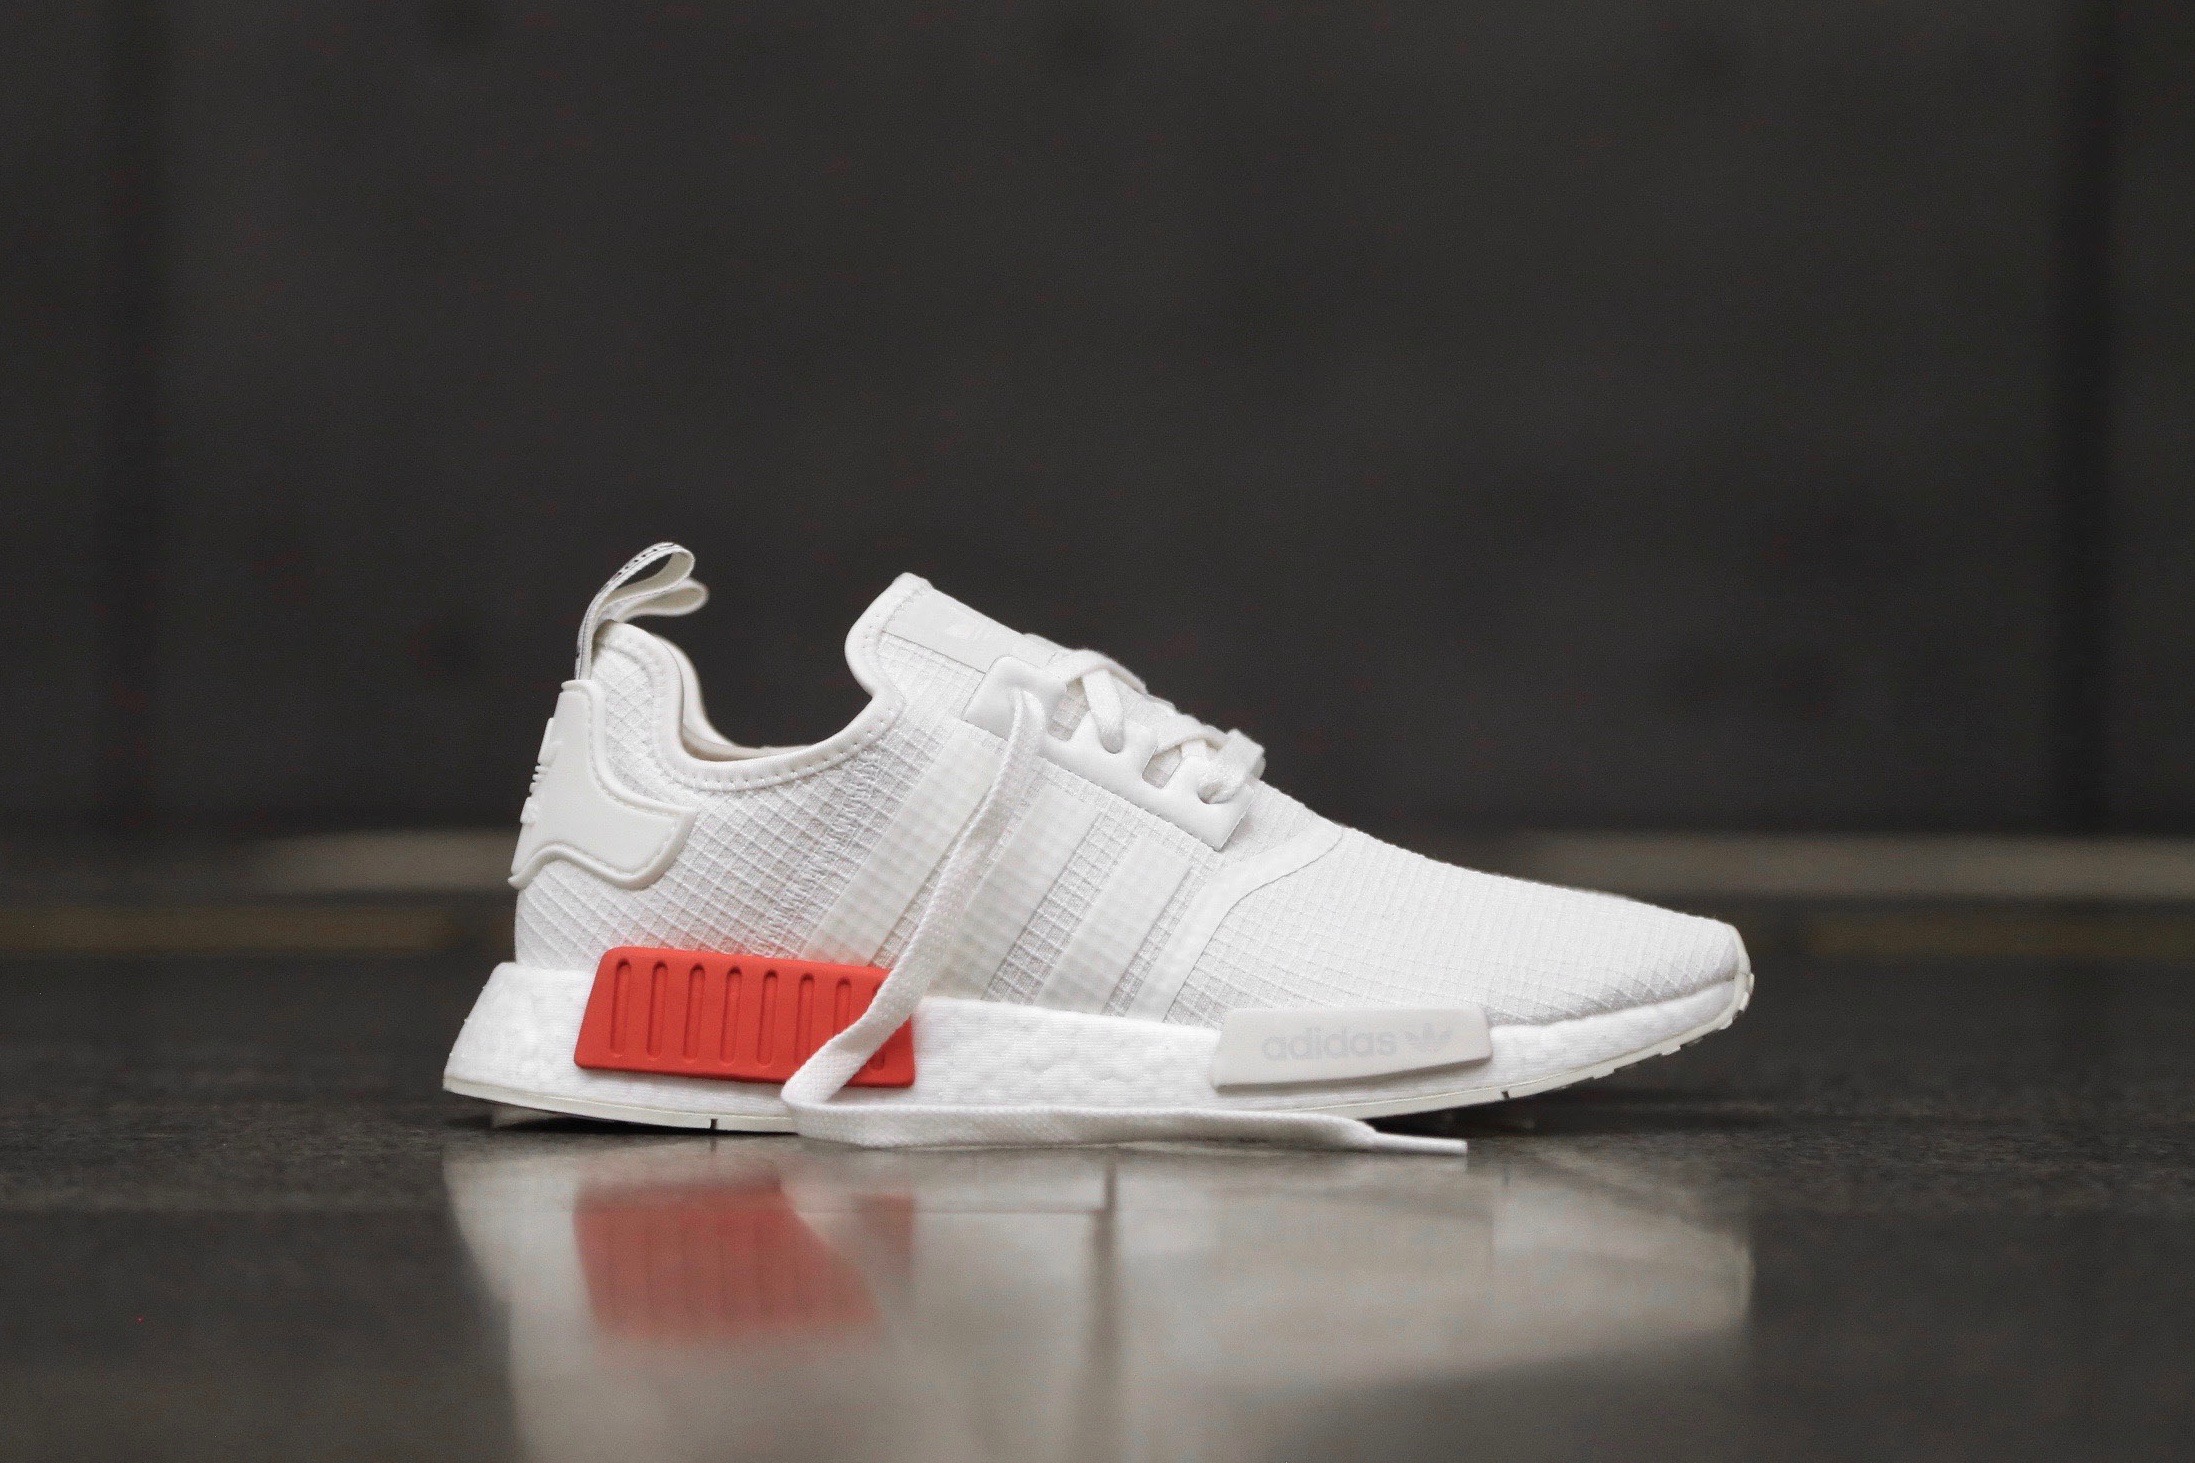 adidas nmd r1 off white lush red